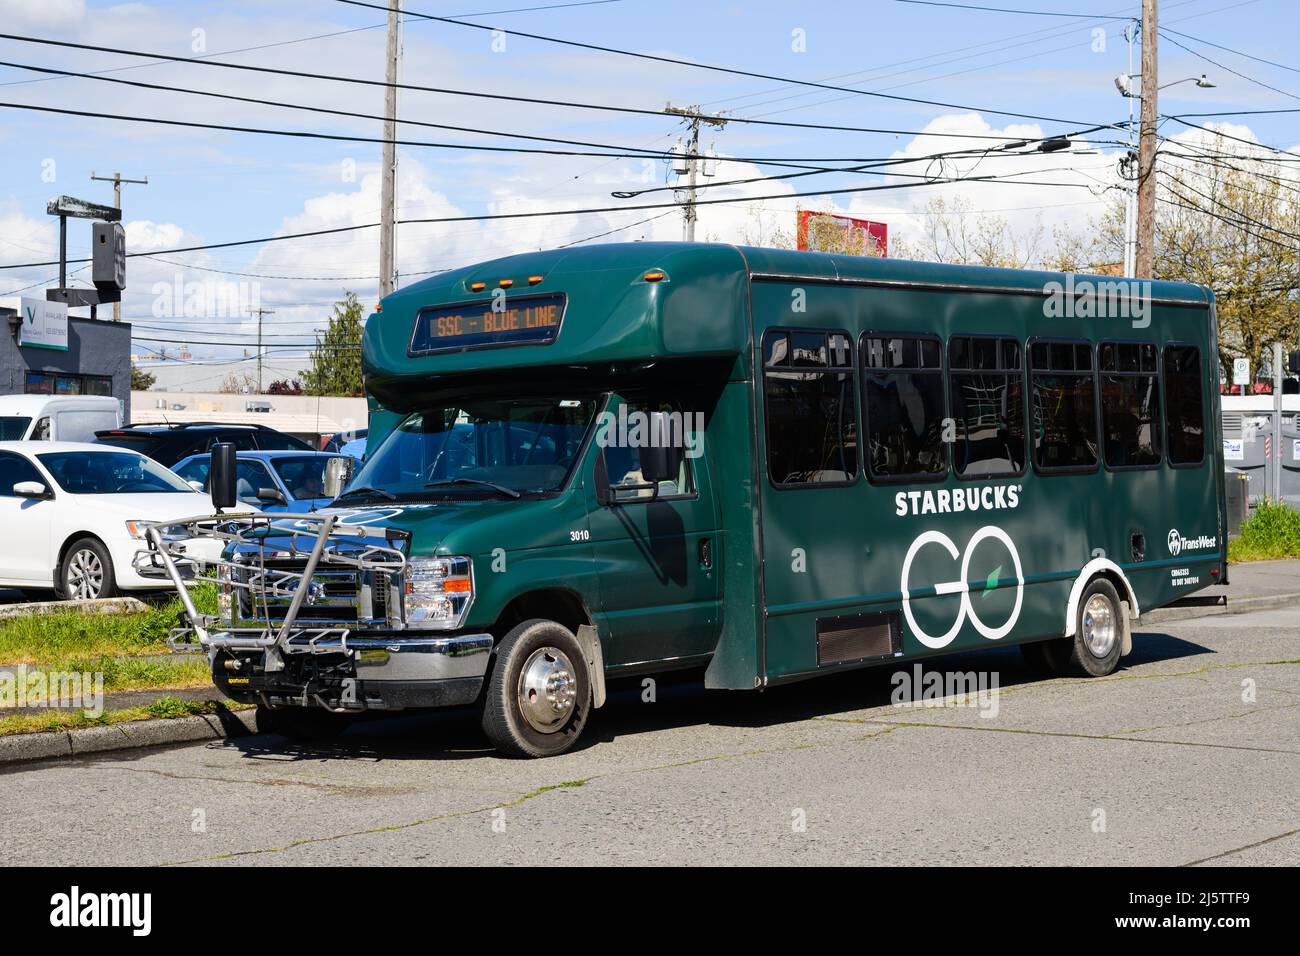 Seattle - April 22, 2022; TransWest shuttle bus in Starbucks Go livery parked near the coffee company headquarters in Seattle Stock Photo